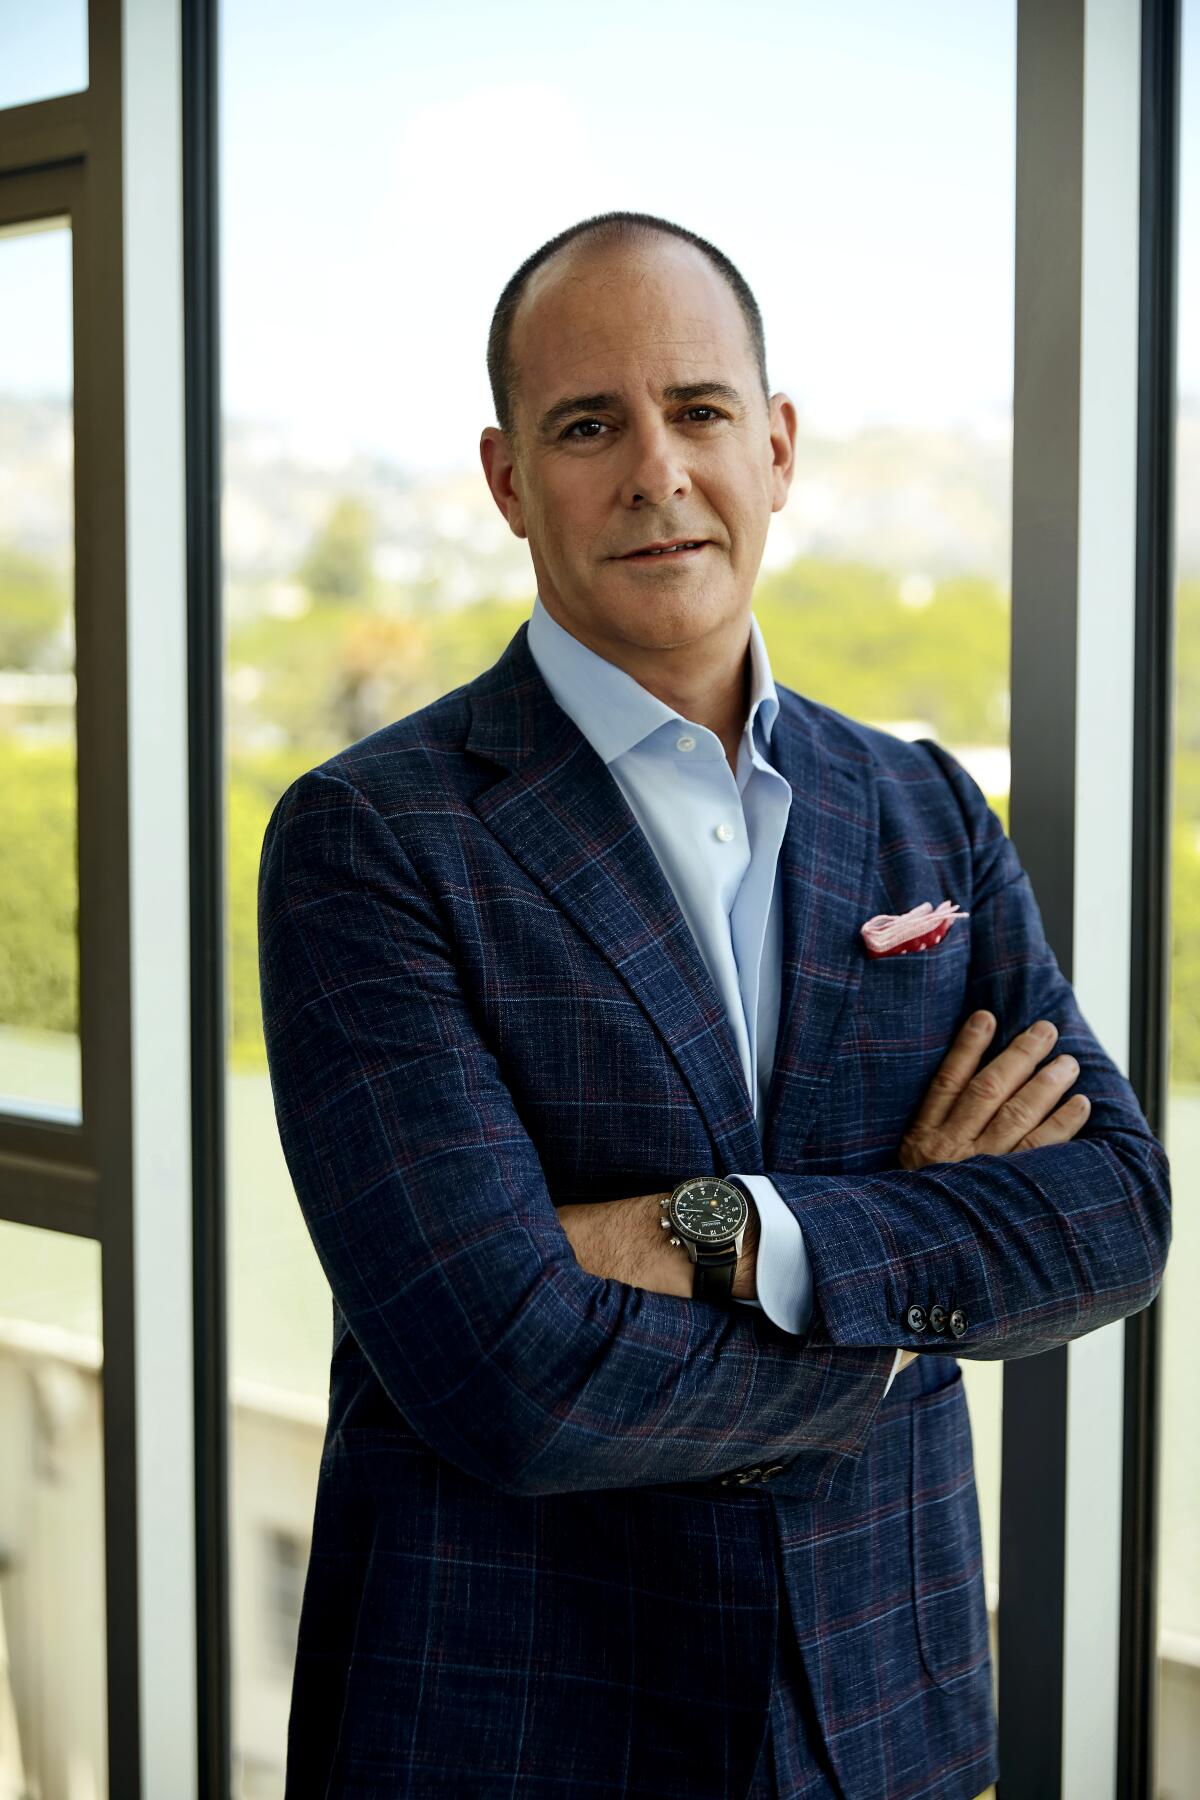 David Nevins, in a suit, stands with his arms folded.